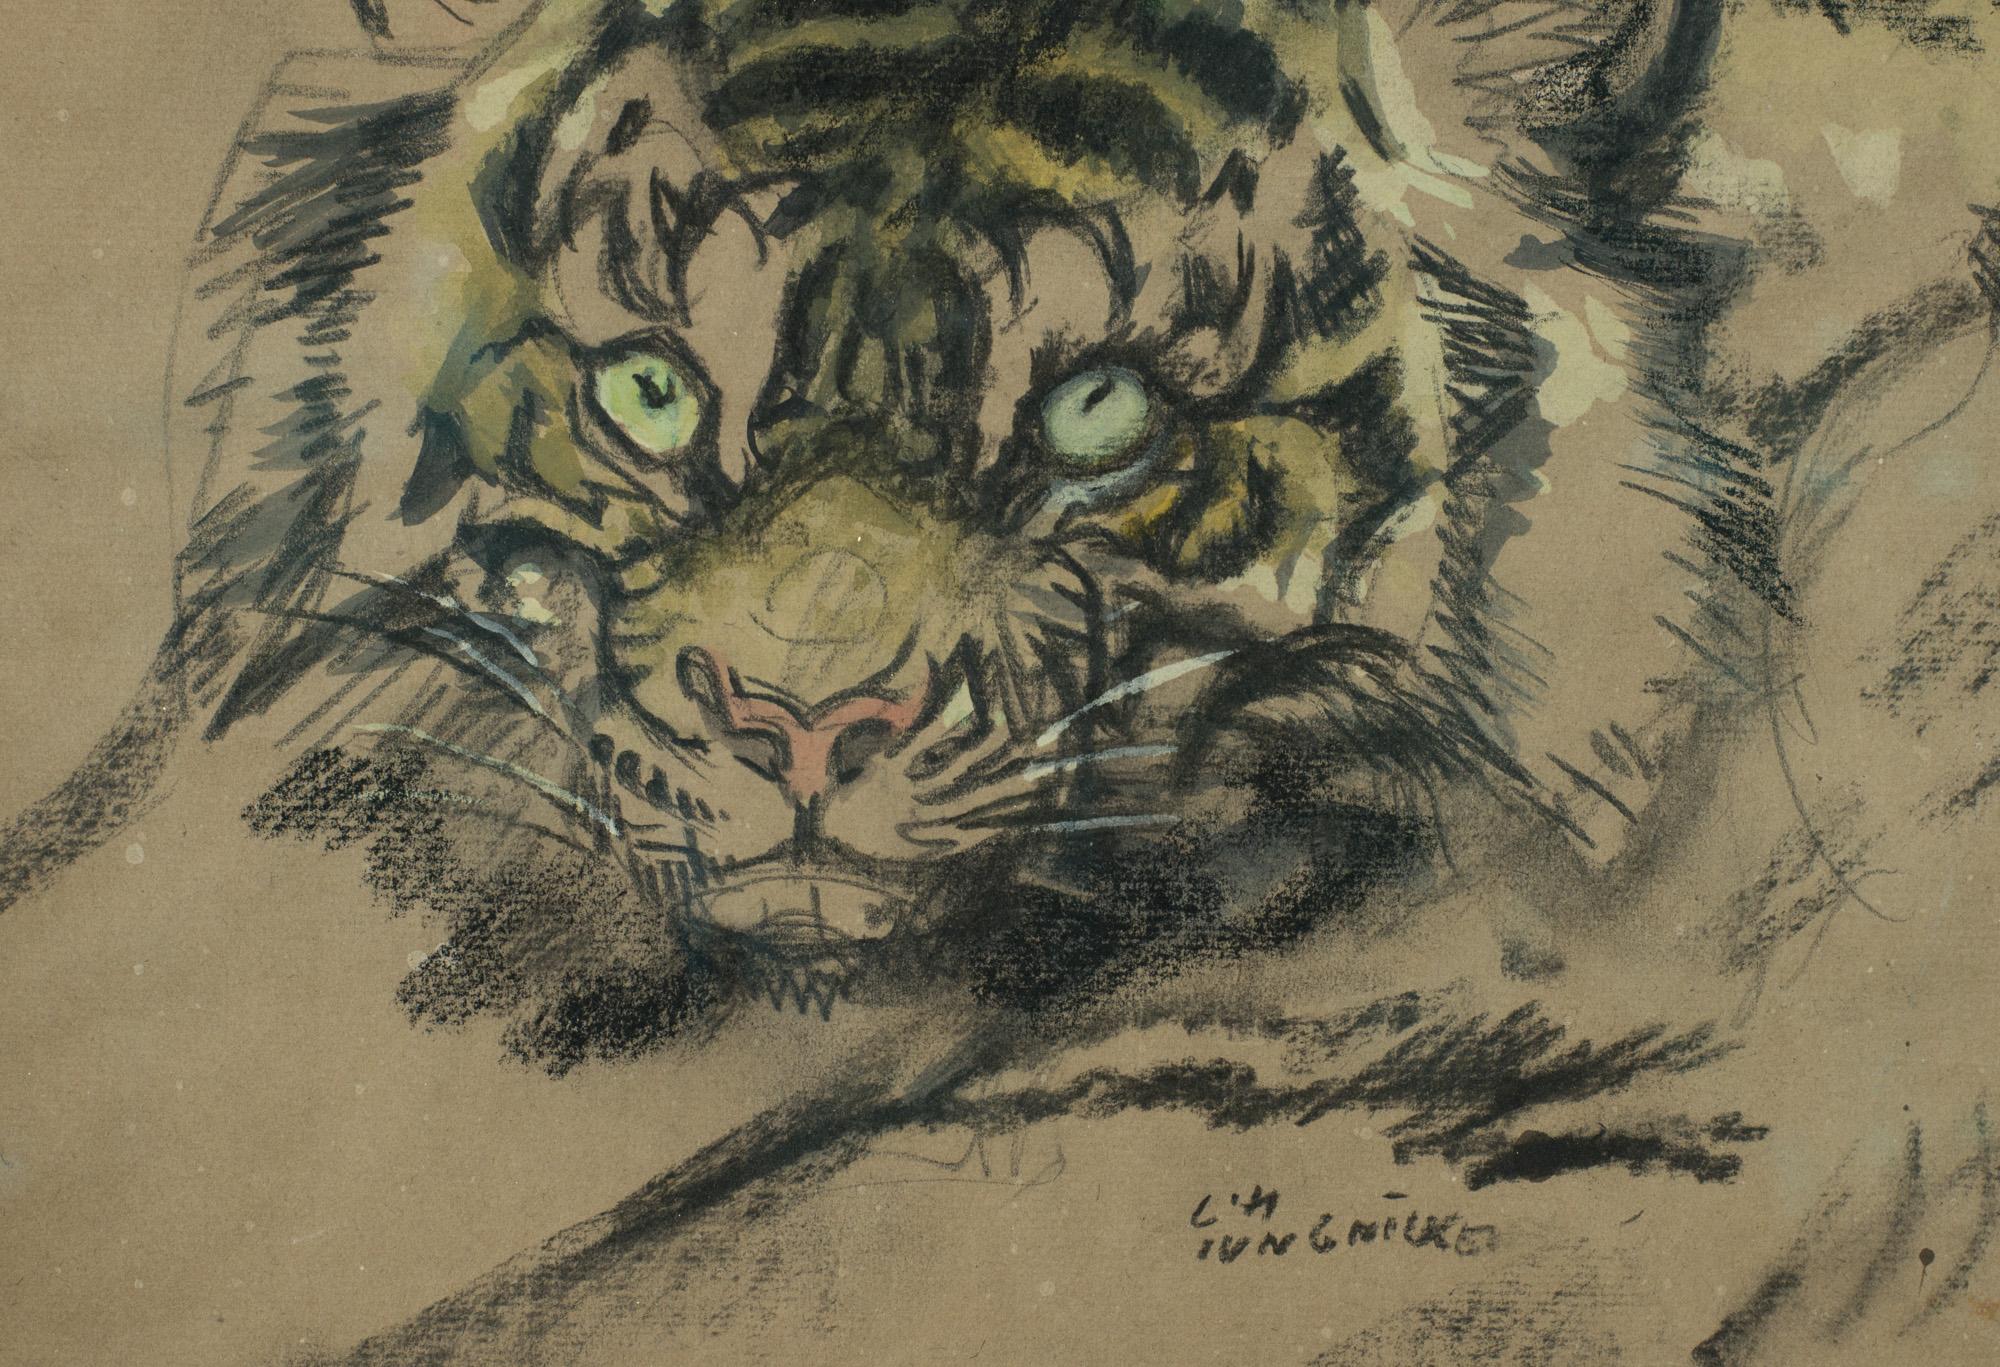 Artwork Tiger painted by Ludwig Heinrich Jungnickel pencil carbon and watercolor on paper ca. 1930 signed German-Austrian painter 

Ludwig Heinrich Jungnickel was one of the most famous co-workers of the Wiener Werkstatte. His most renowned work